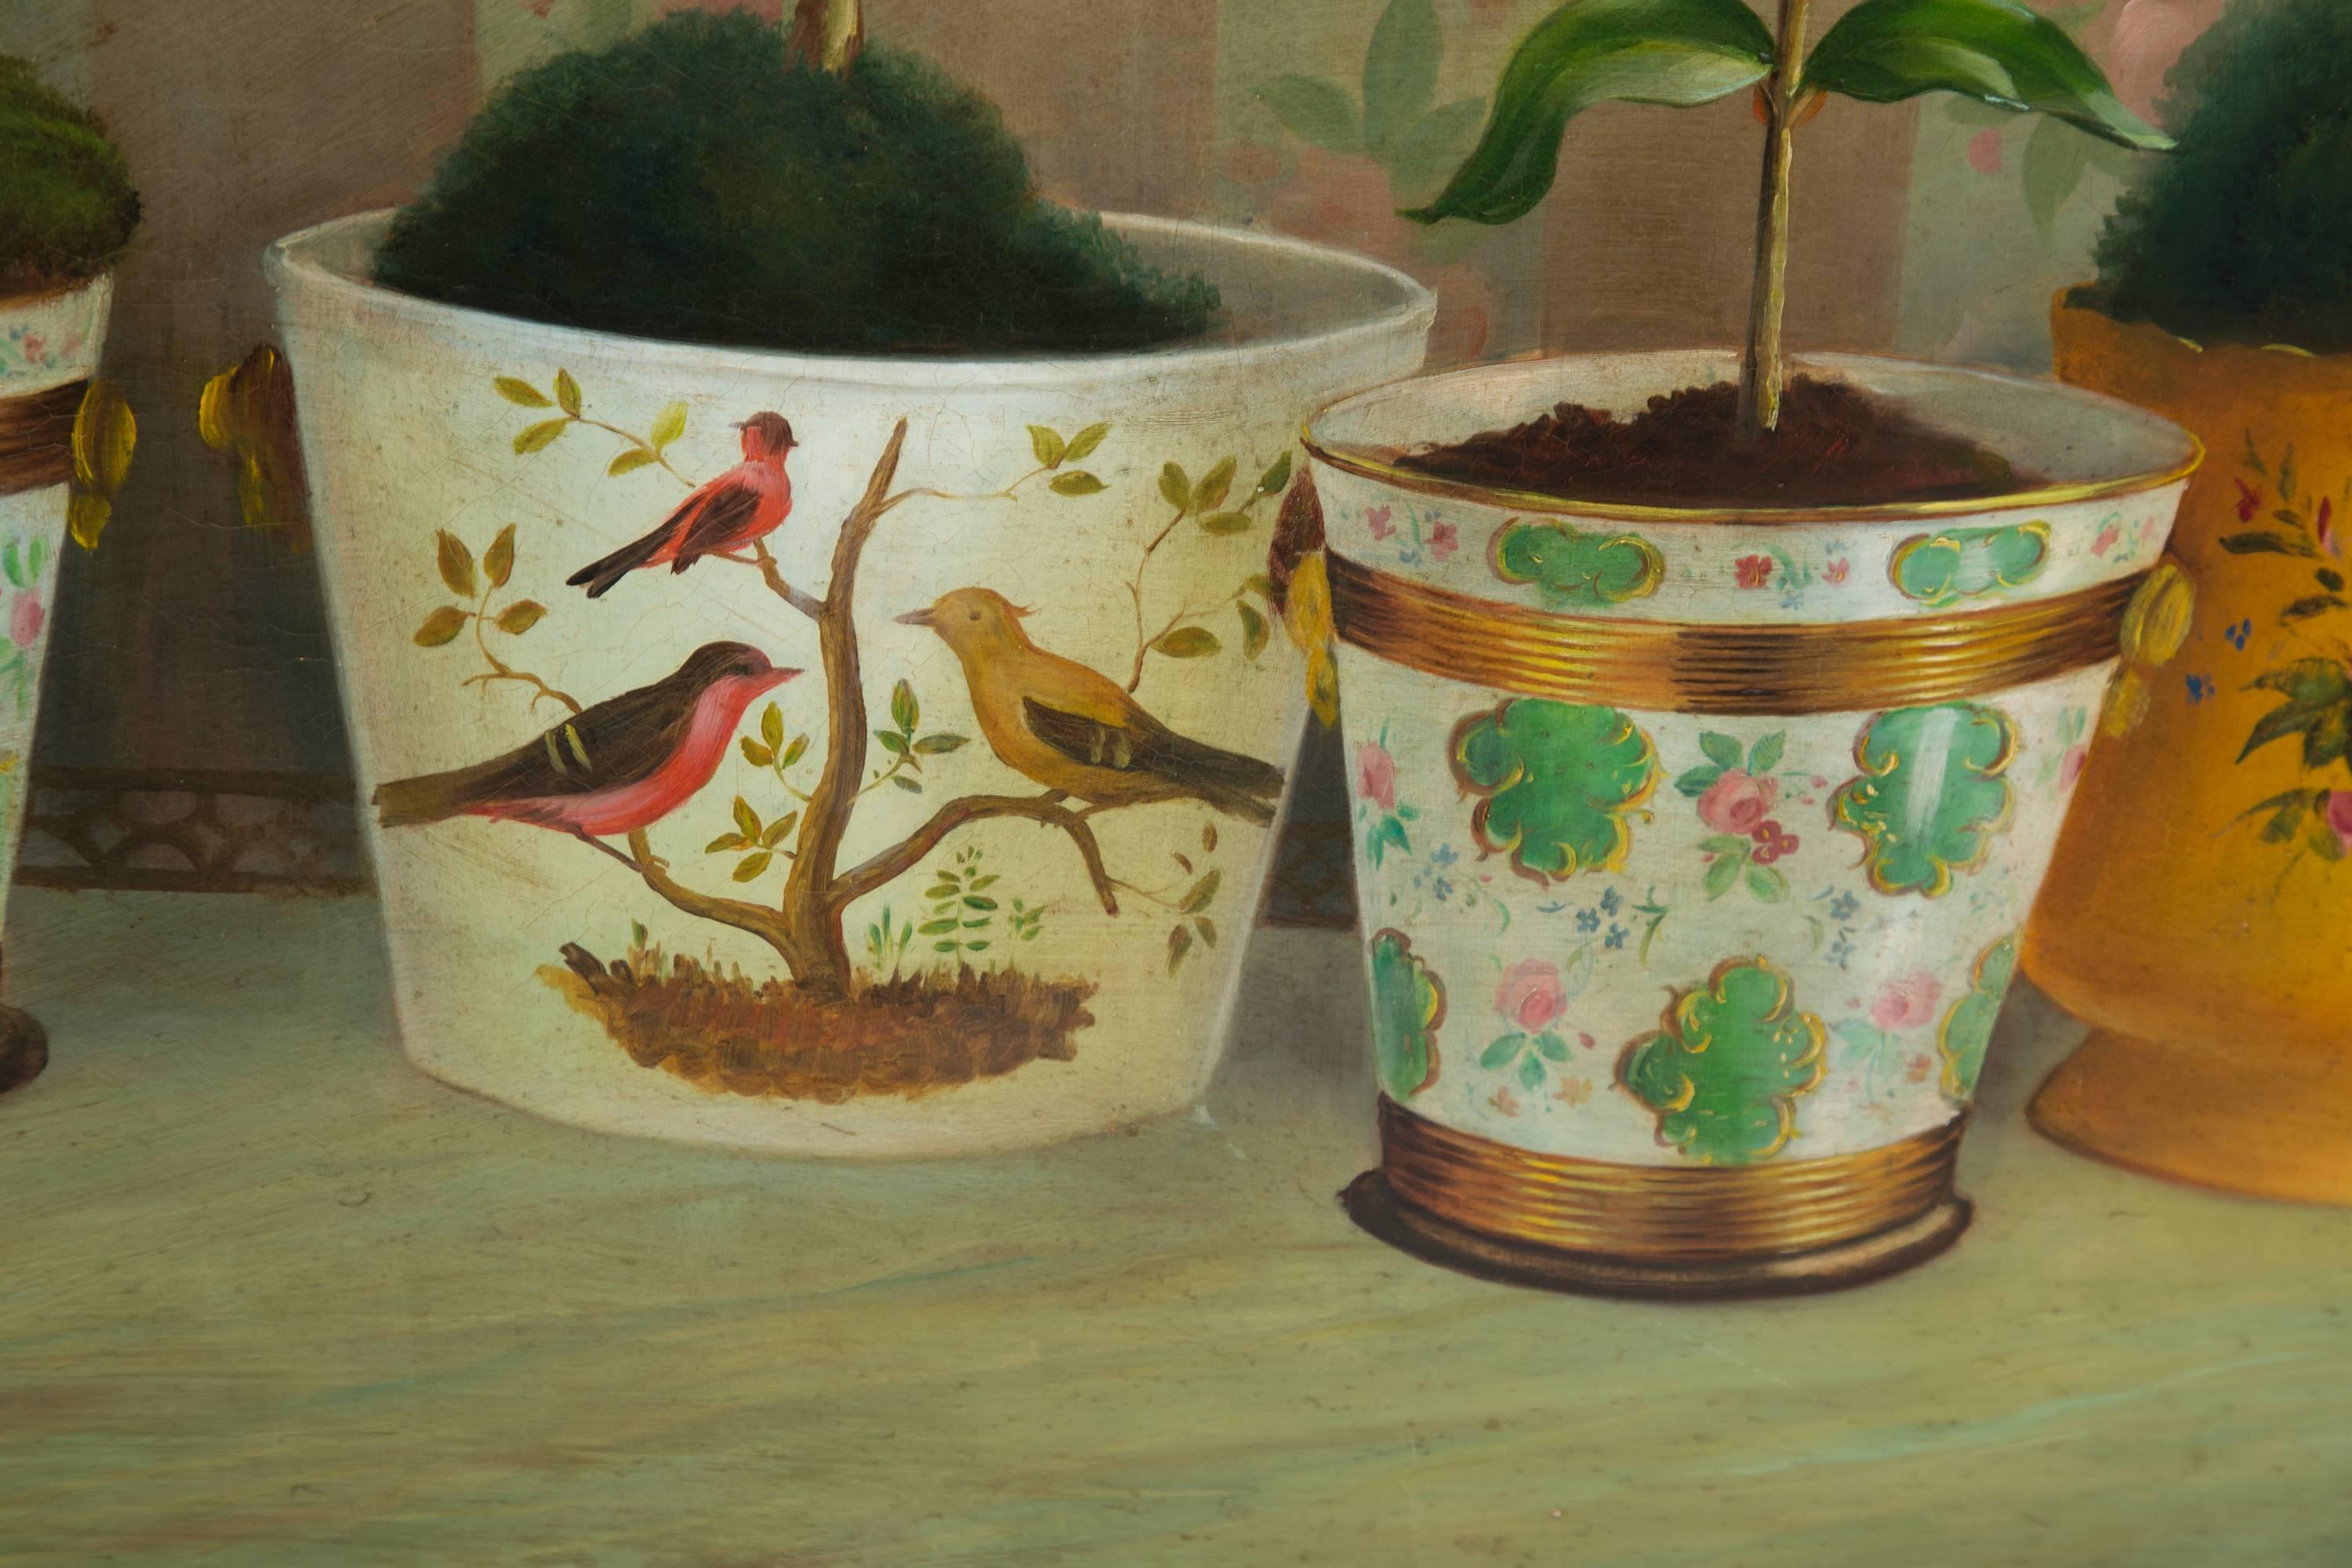 This soft and sophisticated still life depicts a series of potted floral plantings in decorated planters. Signature indistinctly in the lower left corner, early 20th century.